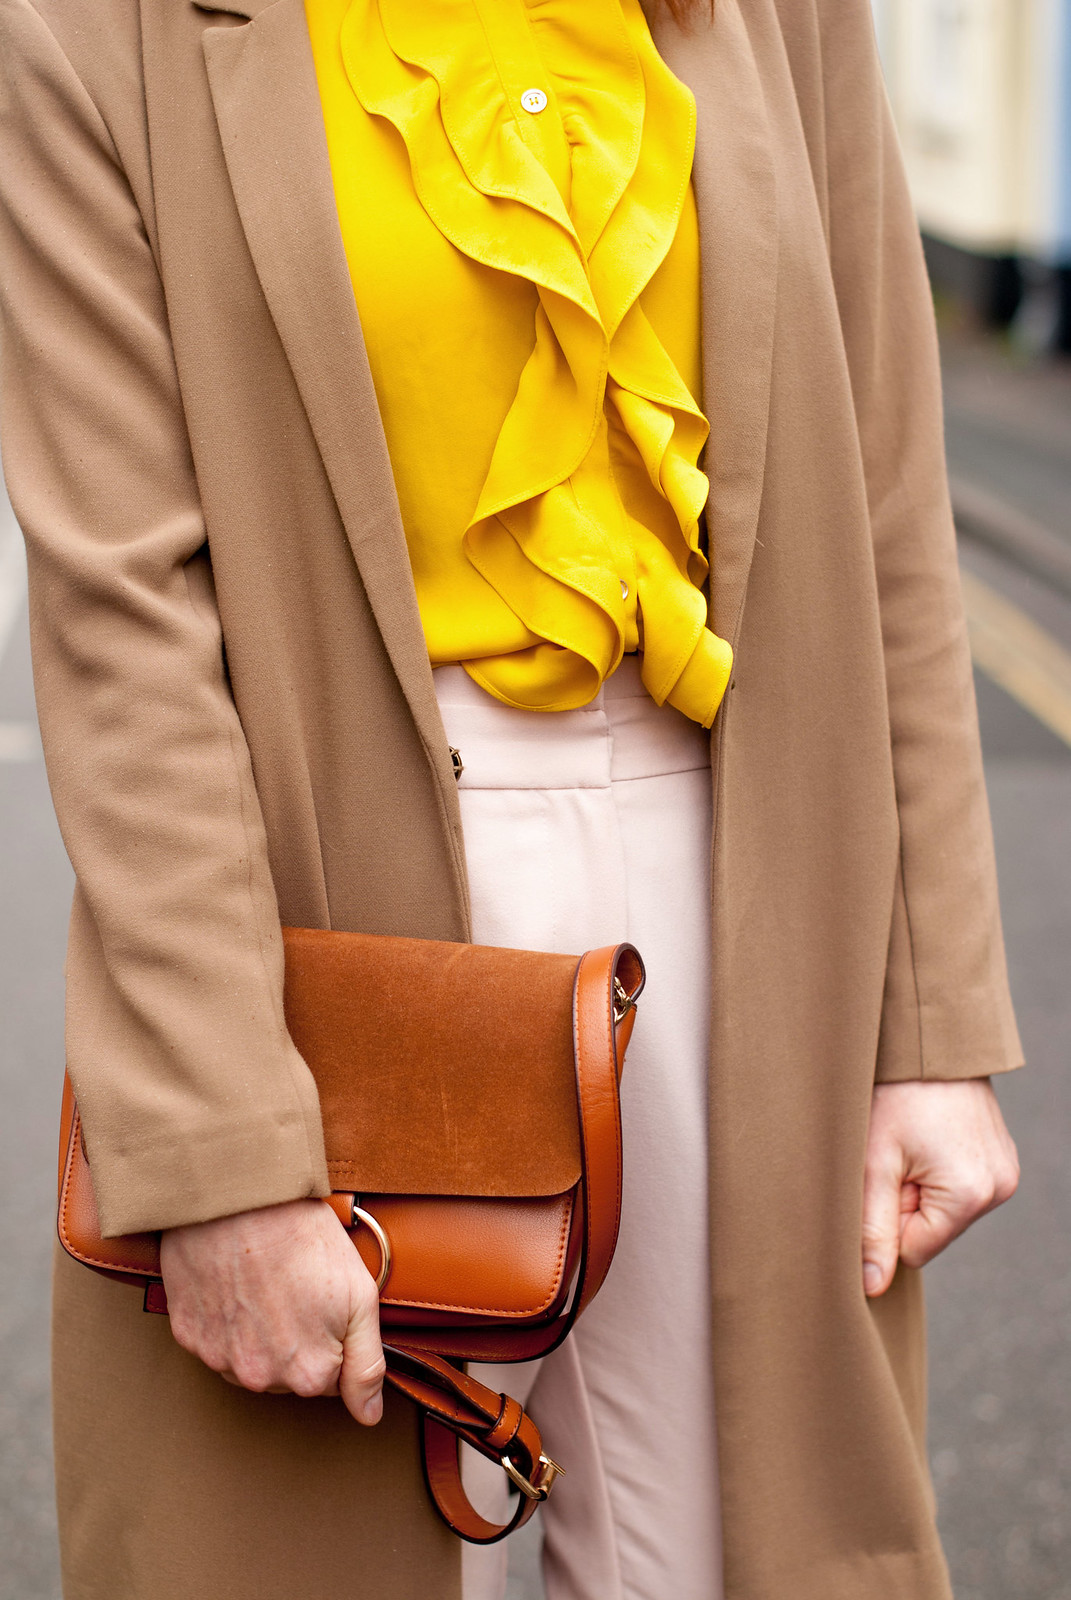 Easter outfit of pastels: Ruffled yellow blouse \ longline camel blazer \ pastel pink peg leg trousers \ tapered pants \ pink ruffle ankle boots | Not Dressed As Lamb, over 40 style